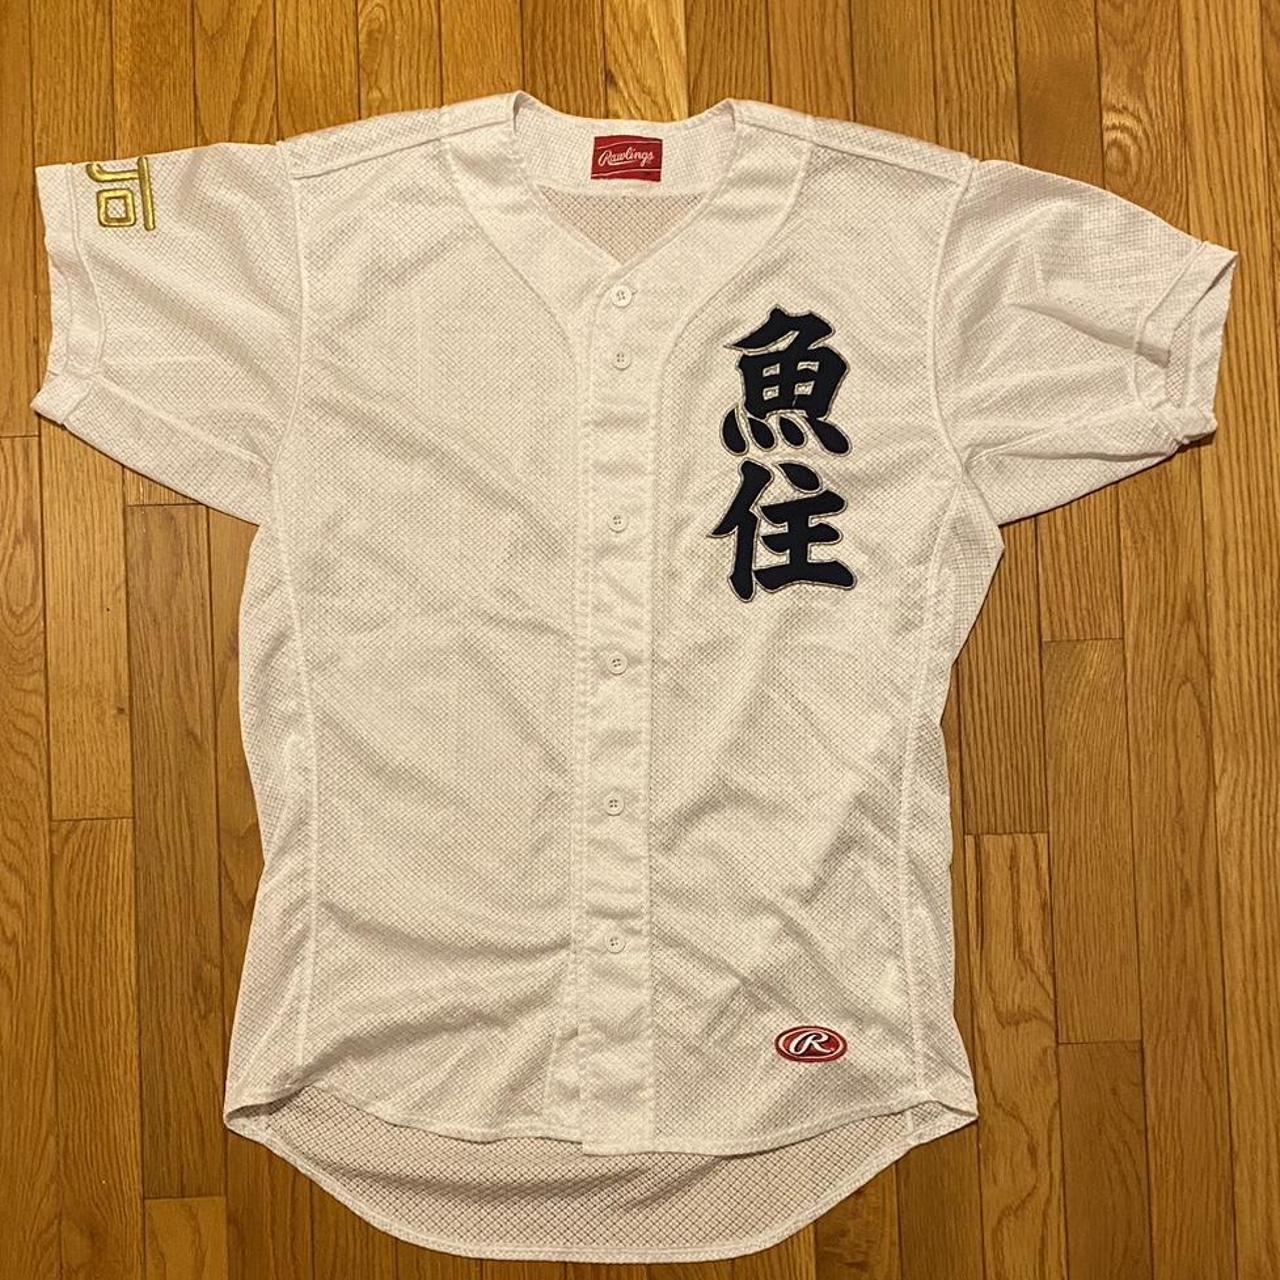 Rawlings 90s Active Jerseys for Men